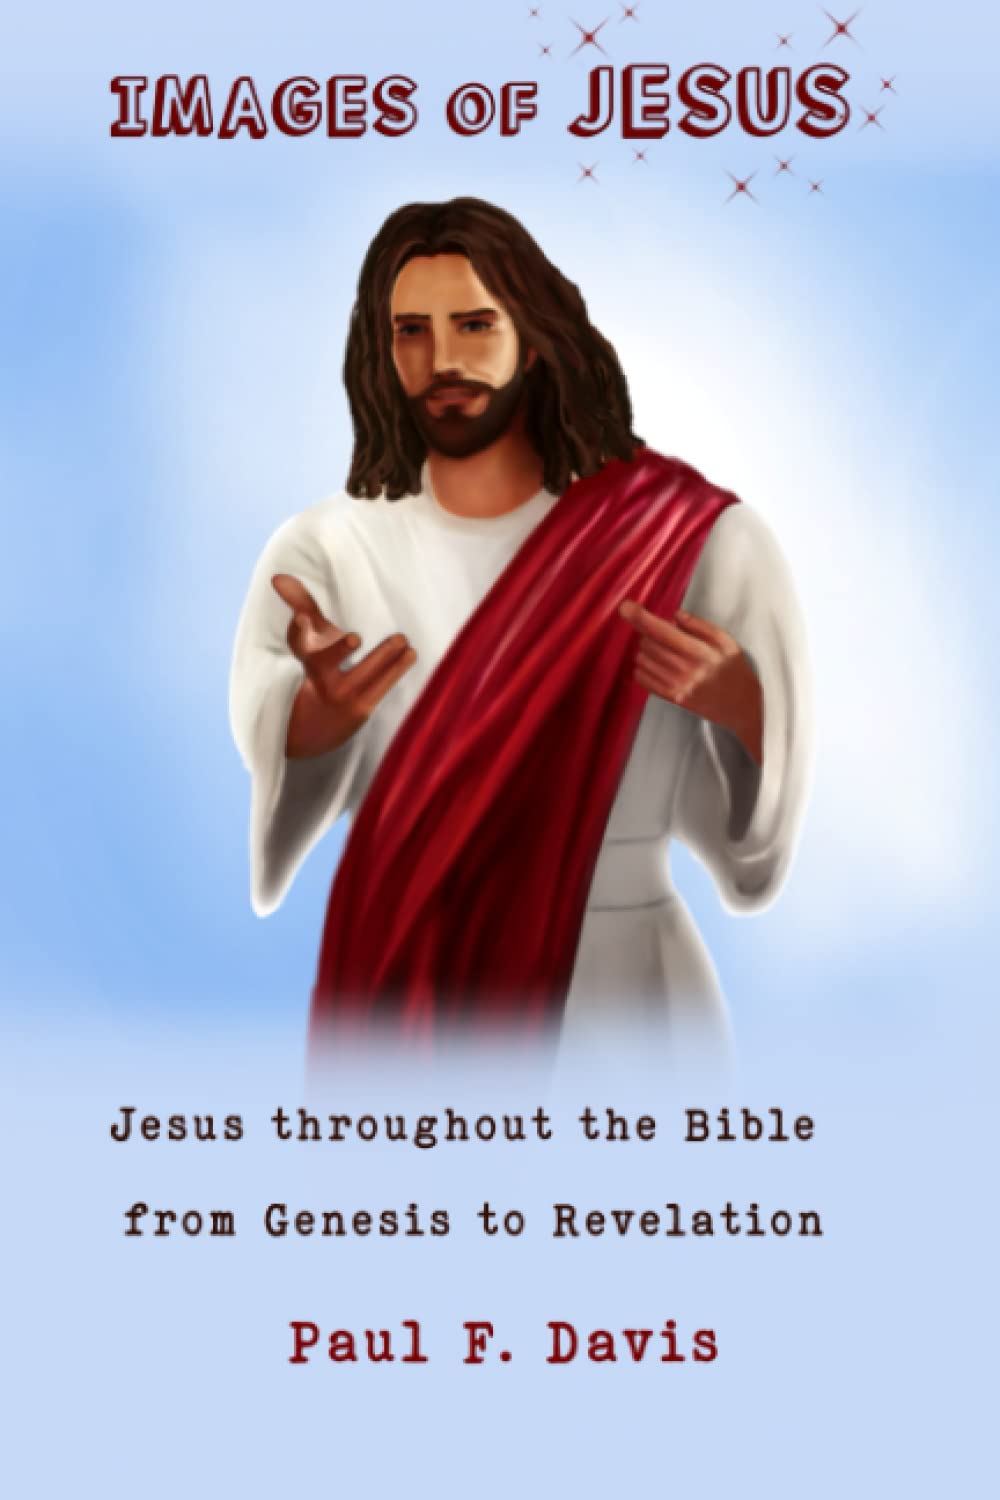 IMAGES of JESUS